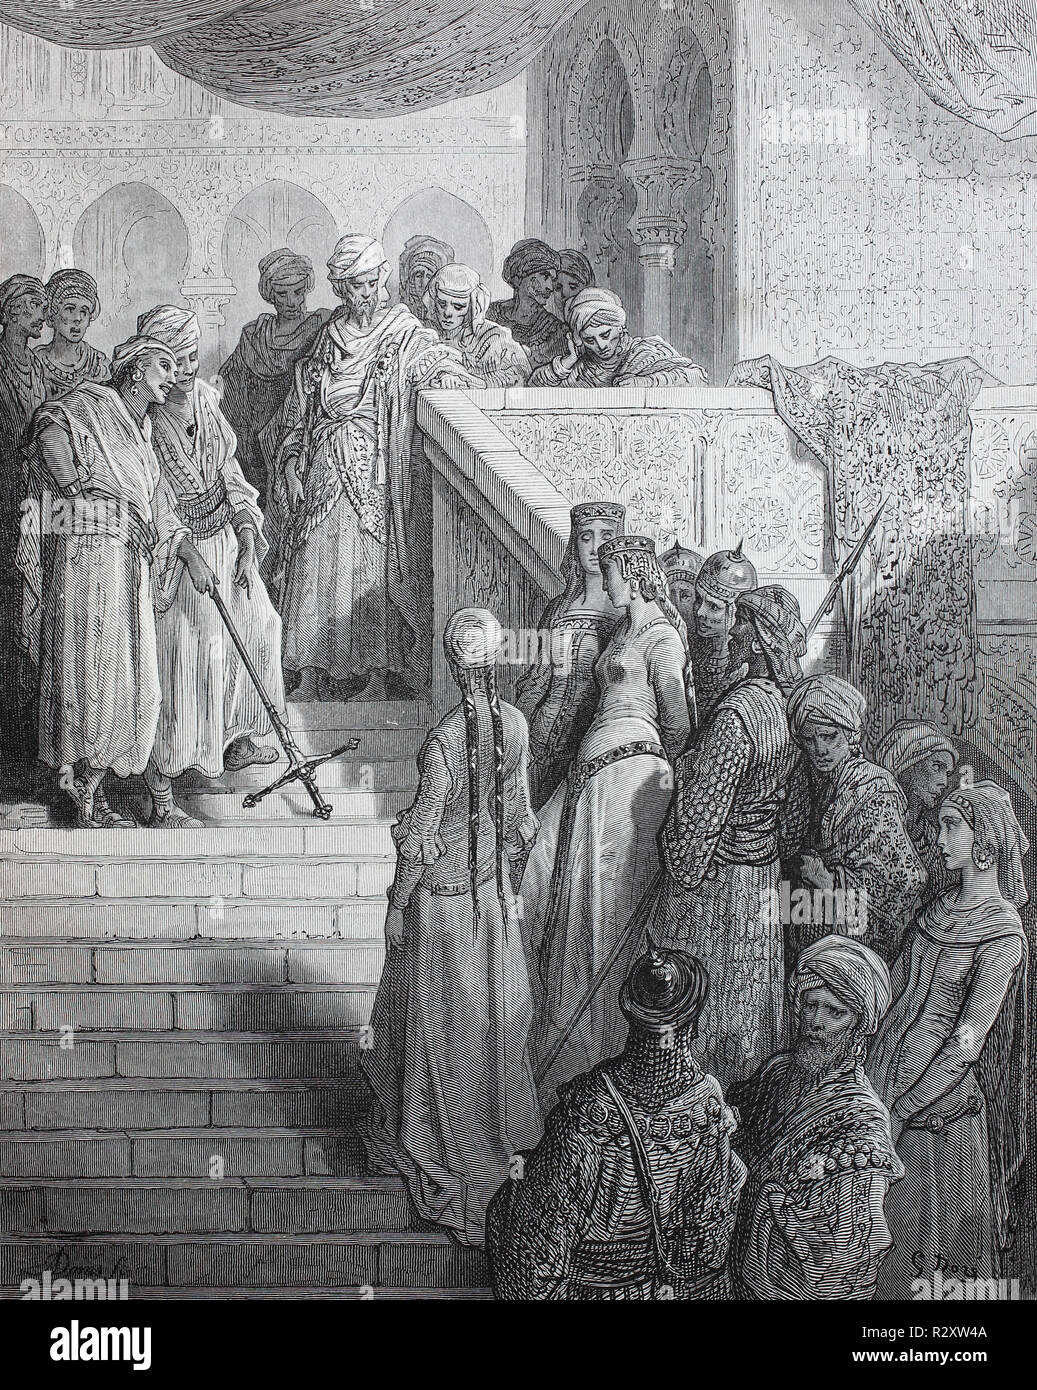 Digital improved reproduction, the women caught during the 1st crusade at Jerusalem. Die gefangenen Frauen, from an original print published in the 19th century Stock Photo